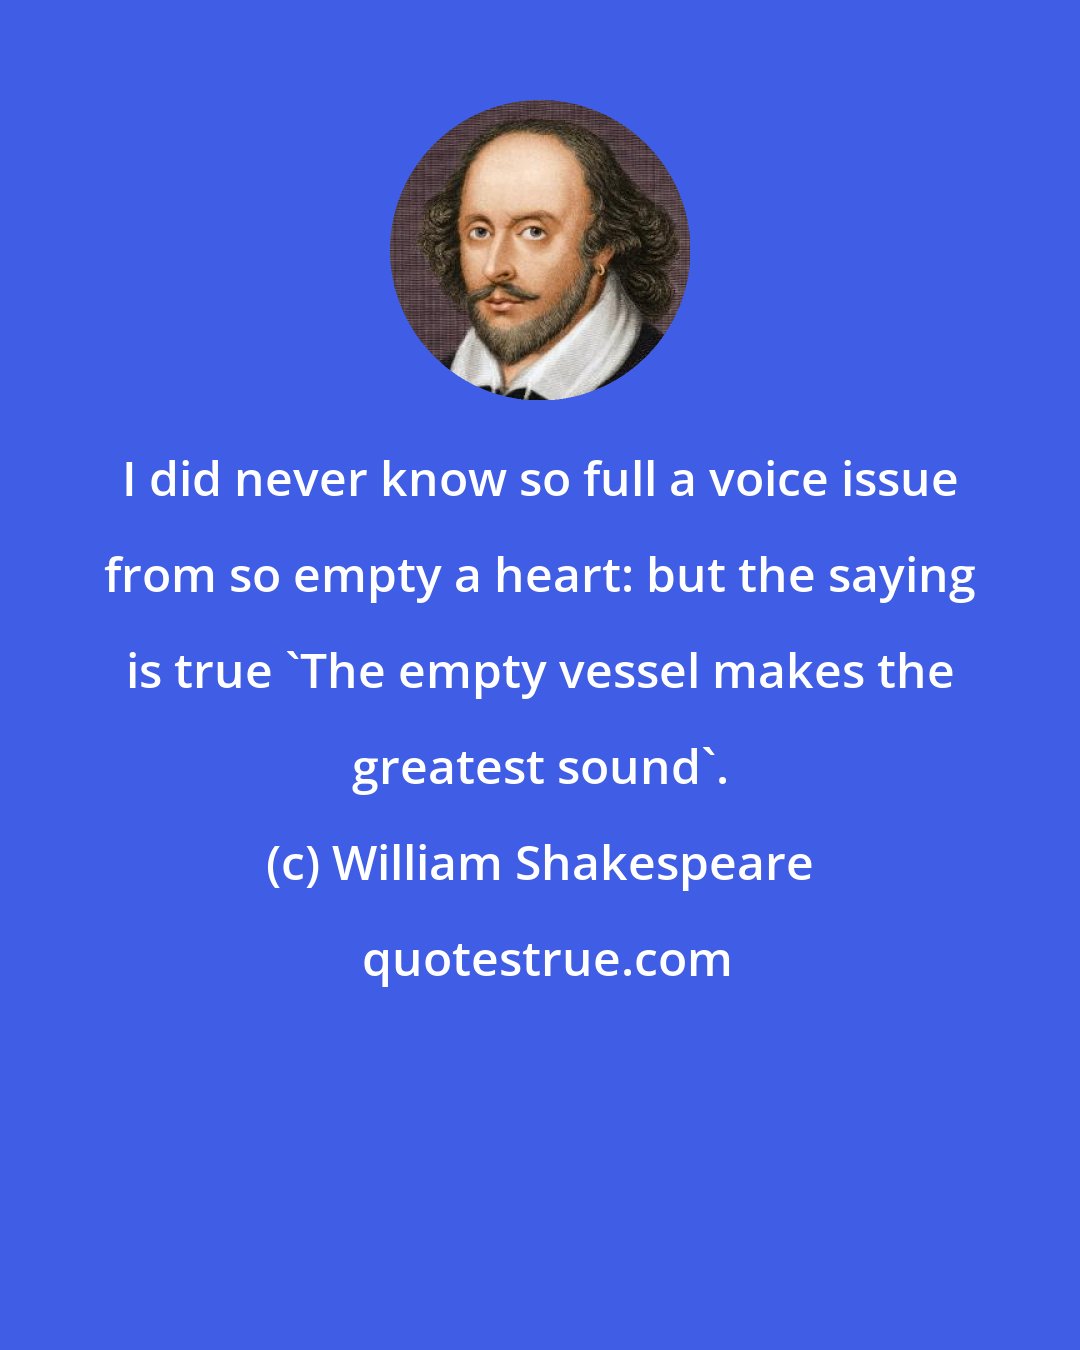 William Shakespeare: I did never know so full a voice issue from so empty a heart: but the saying is true 'The empty vessel makes the greatest sound'.